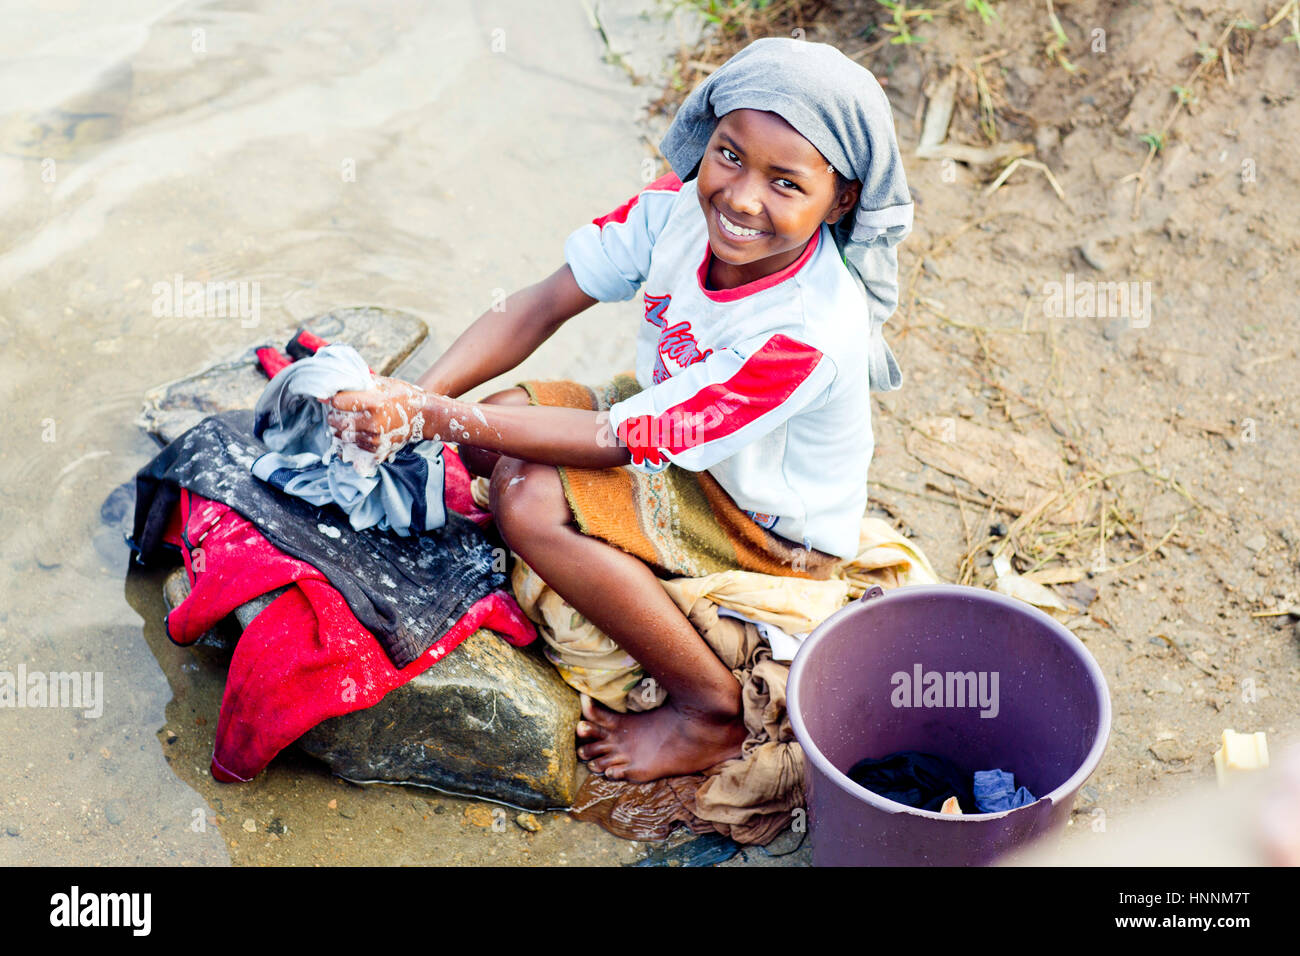 https://c8.alamy.com/comp/HNNM7T/young-malagasy-girl-washing-clothes-in-the-river-in-madagascar-HNNM7T.jpg